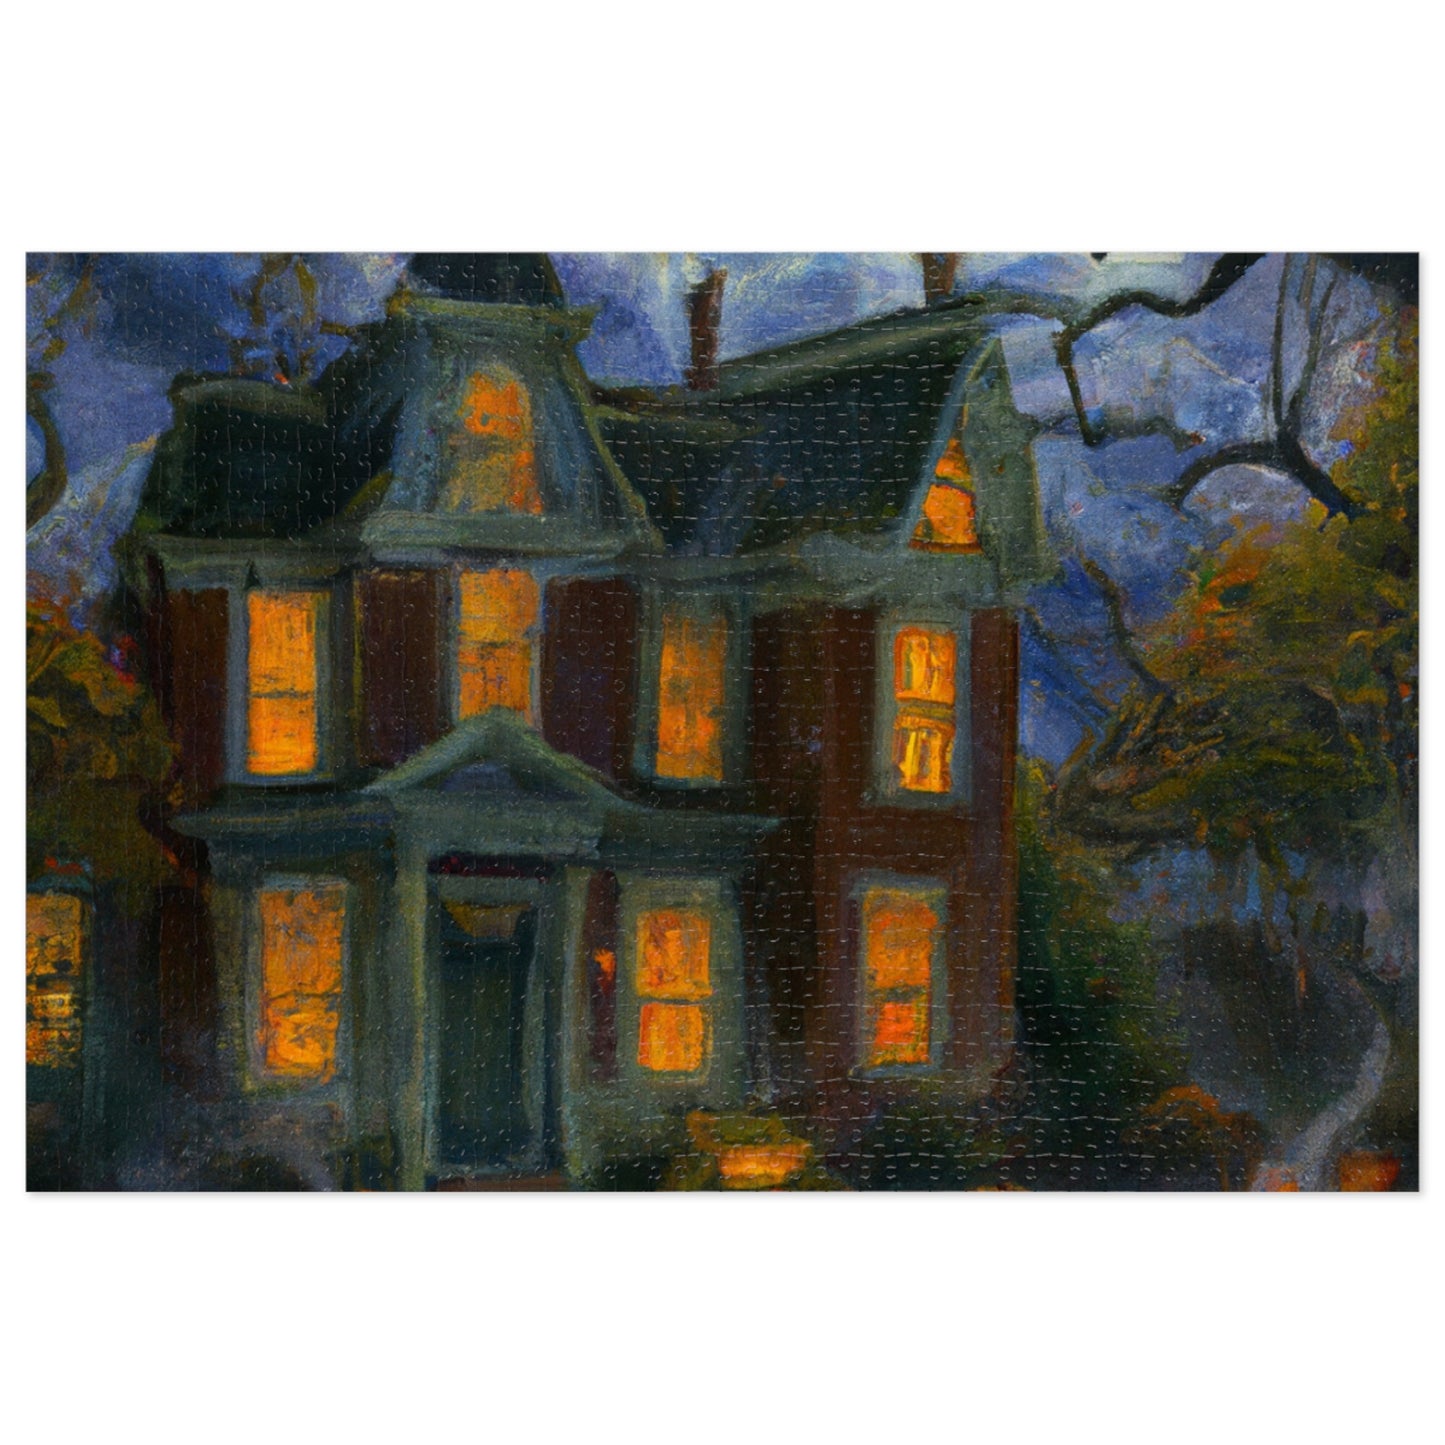 The Haunted Mansion - JigSaw Puzzle 1000 Piece: Emmeline Nightshade - Halloween Gift | Spooky Scenes